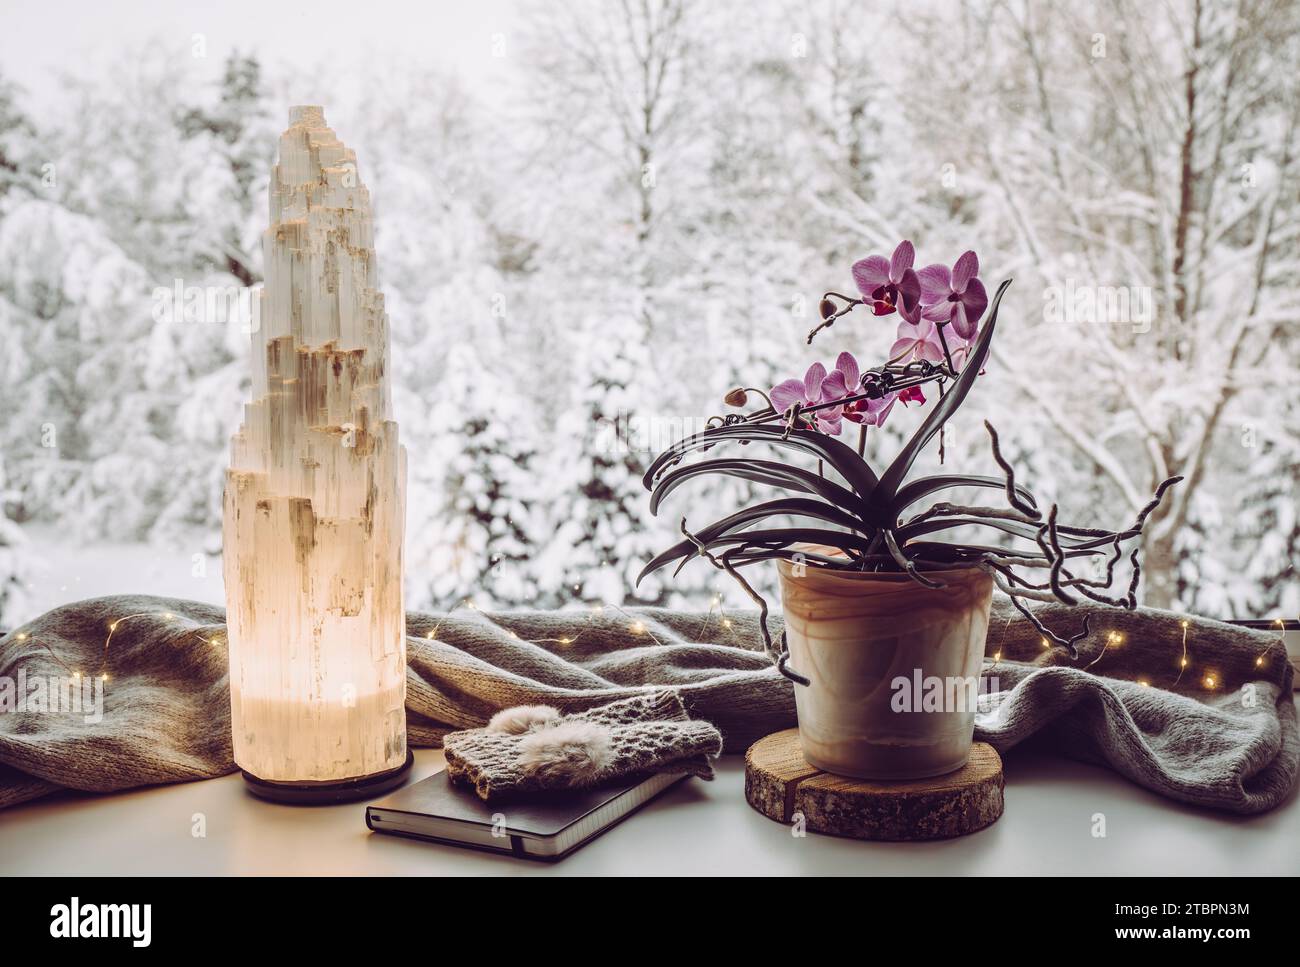 Cozy winter home set with natural selenite crystal electric tower lamp illuminated on window sill, gray color scarf and gloves, paper note book orchid. Stock Photo